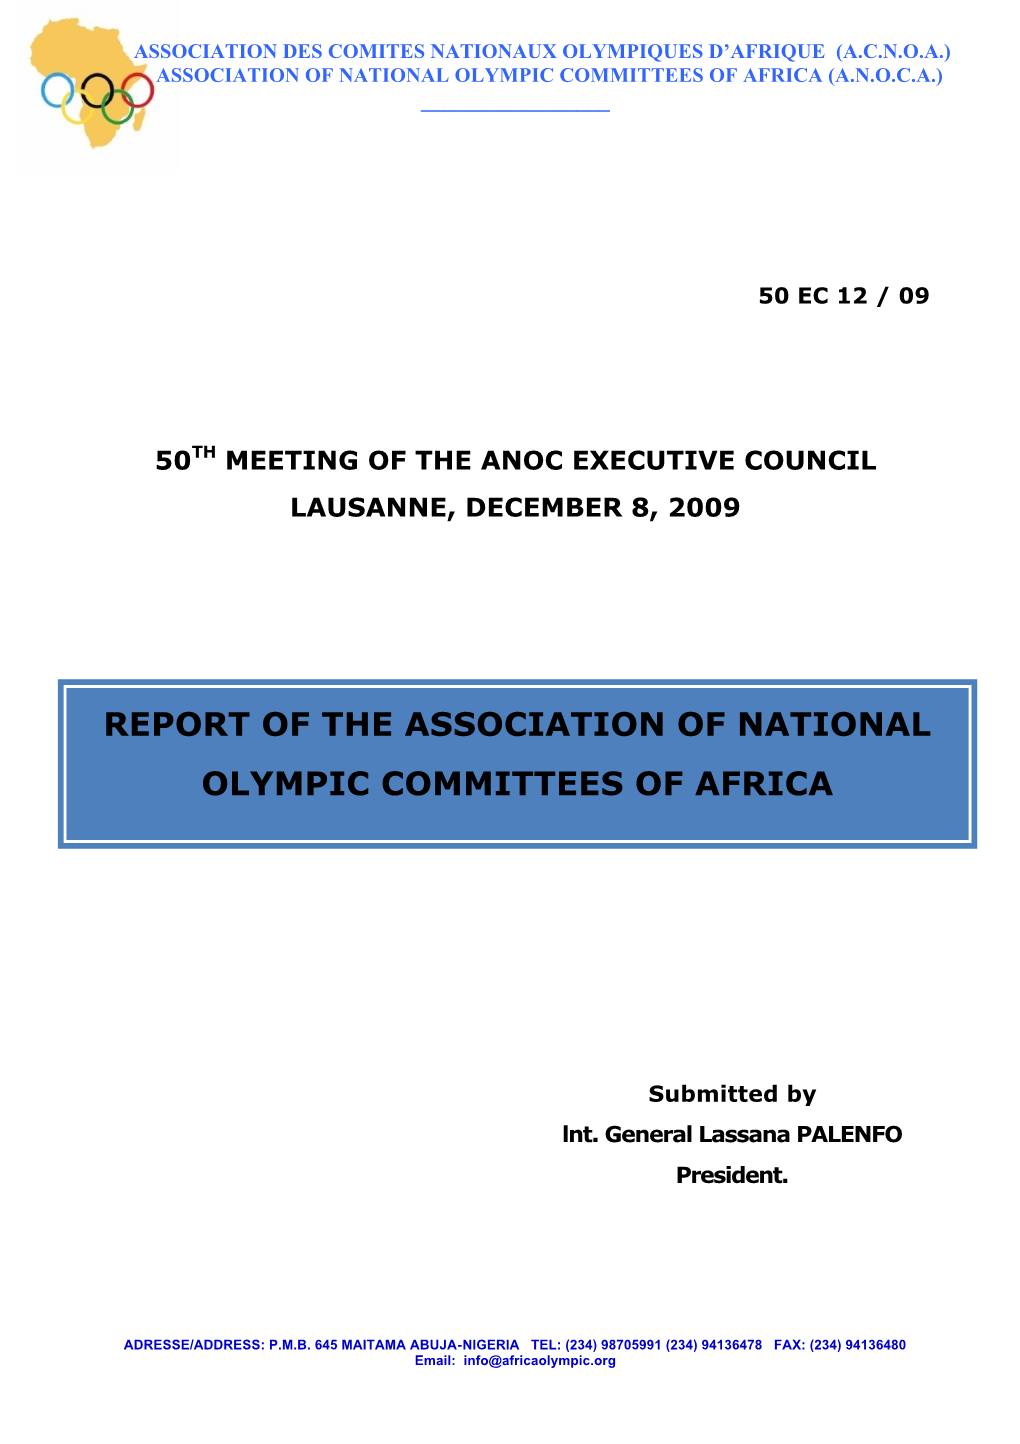 Report of the Association of National Olympic Committees of Africa